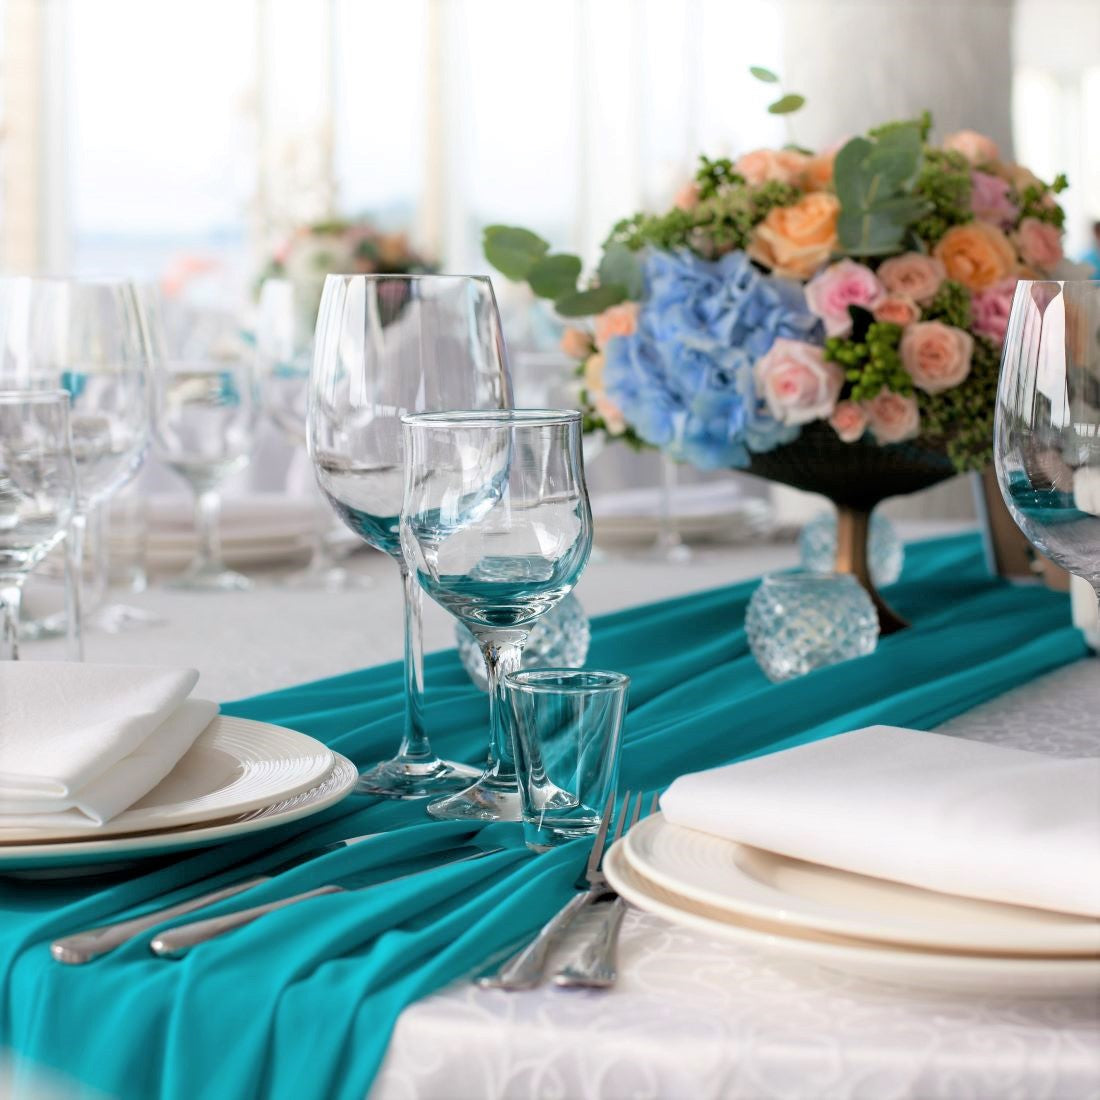 How to Use Chiffon Table Runners for Events